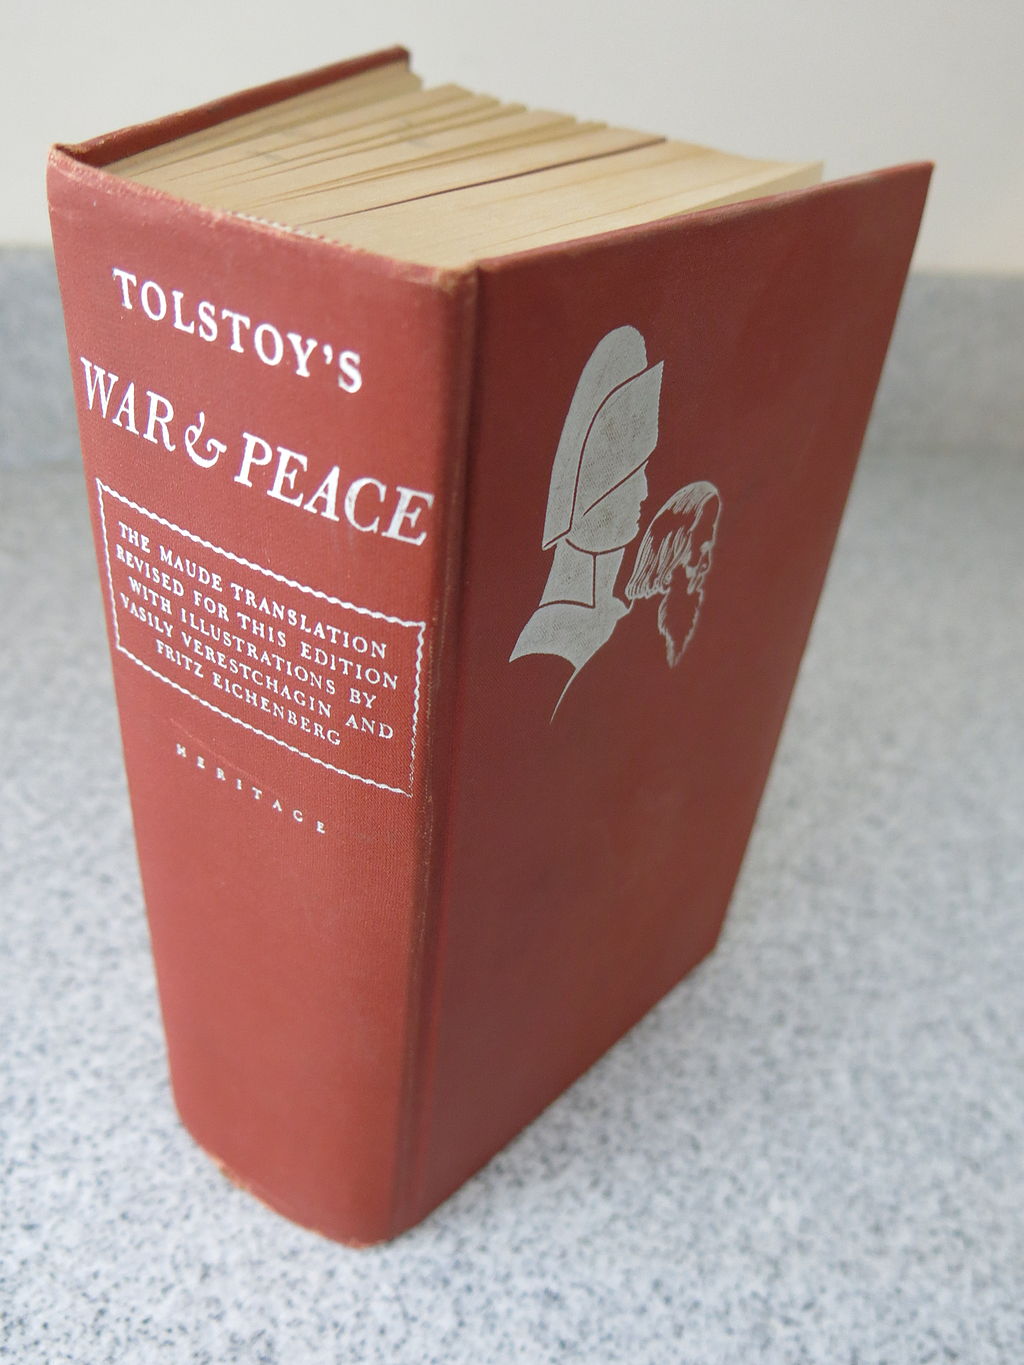 Tolstoy's war and peace.